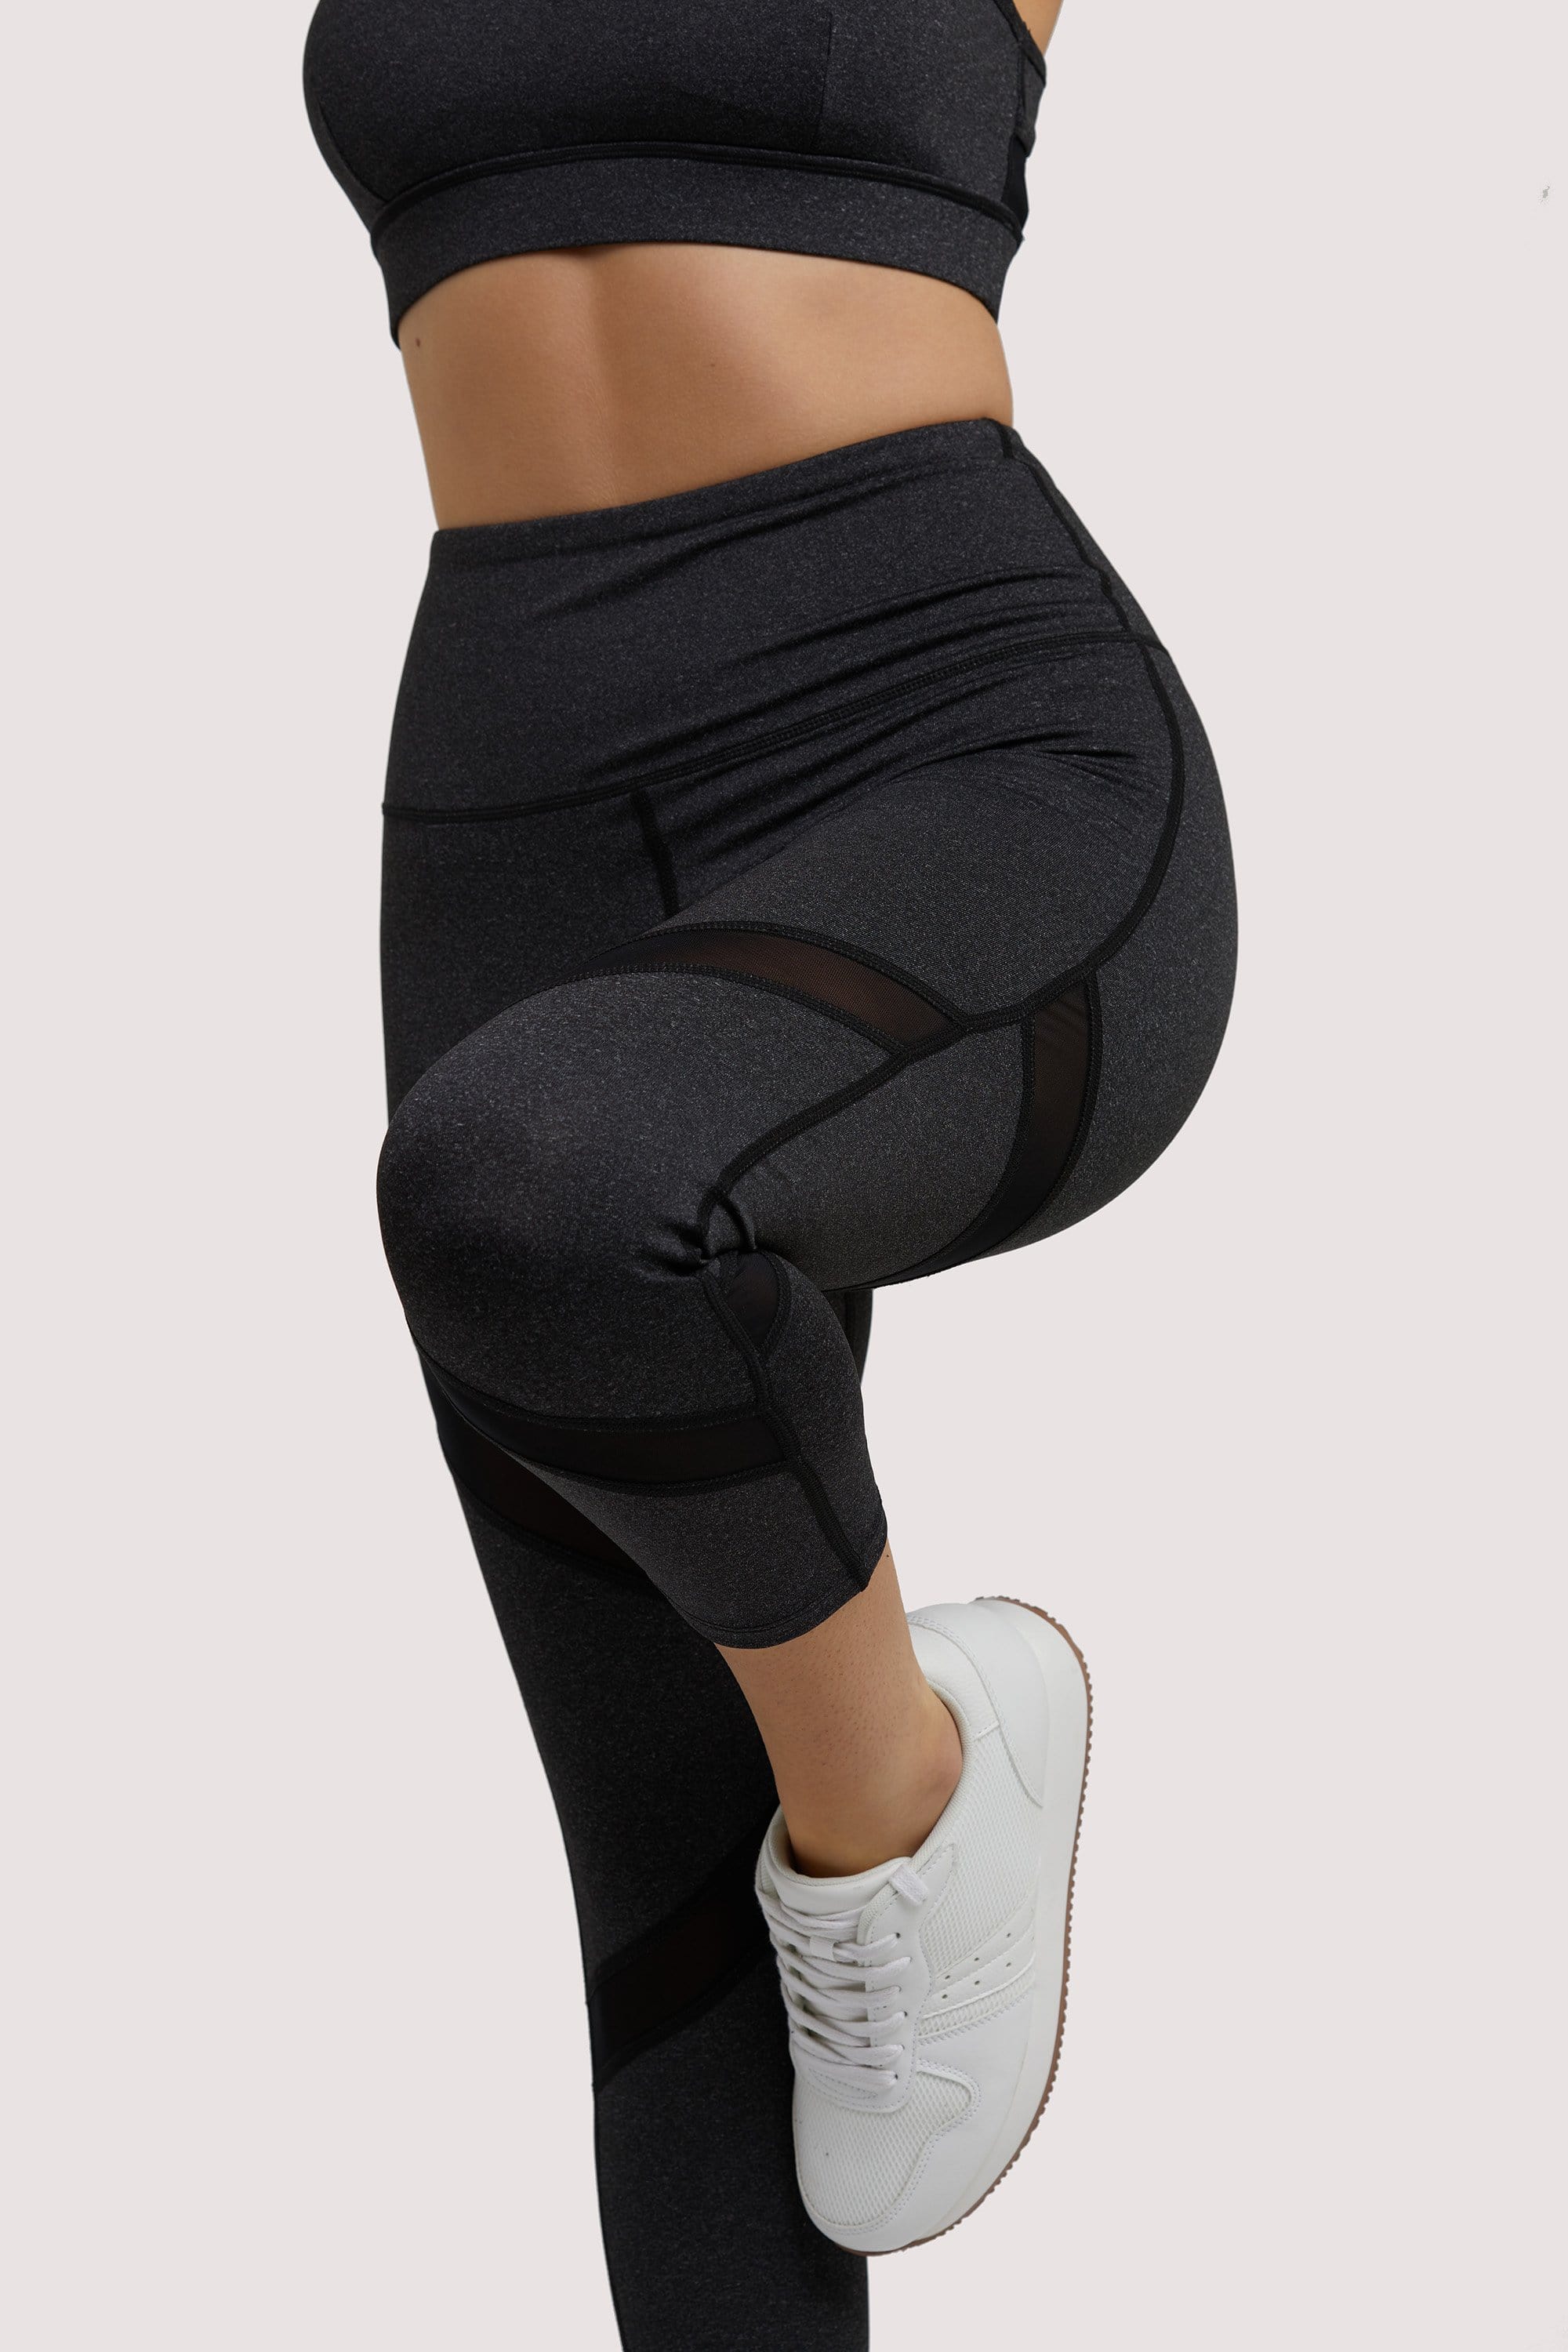 Garage Black Athletic Leggings with Mesh Panels Size Small